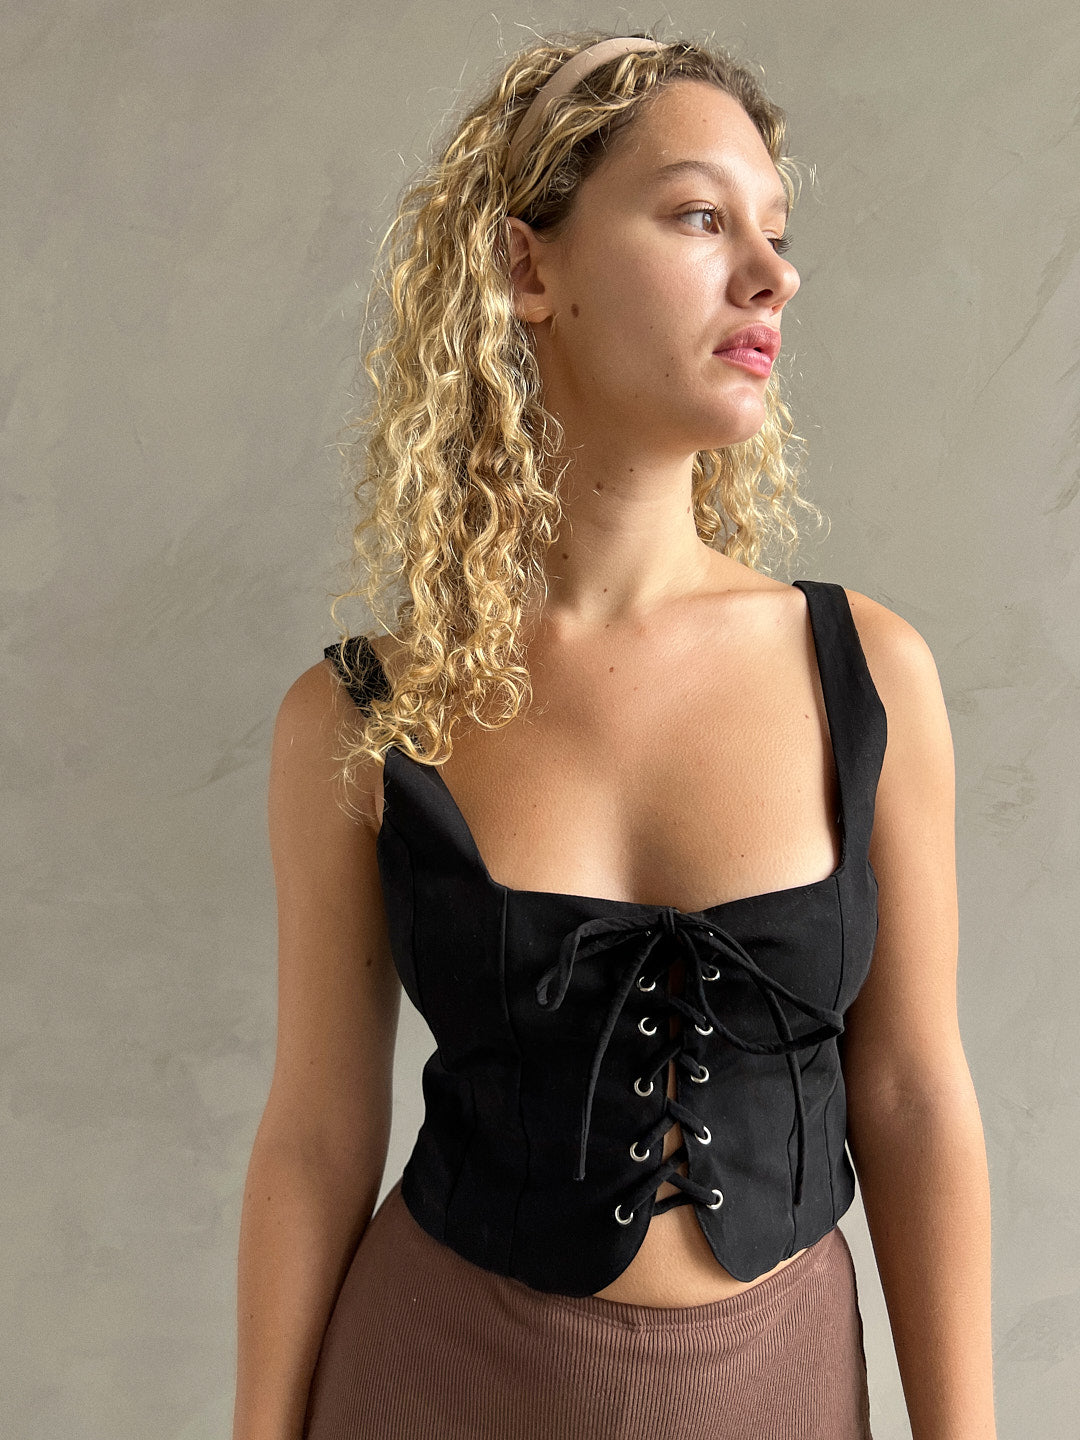 Black Woven Structured Lace Up Corset Crop Top